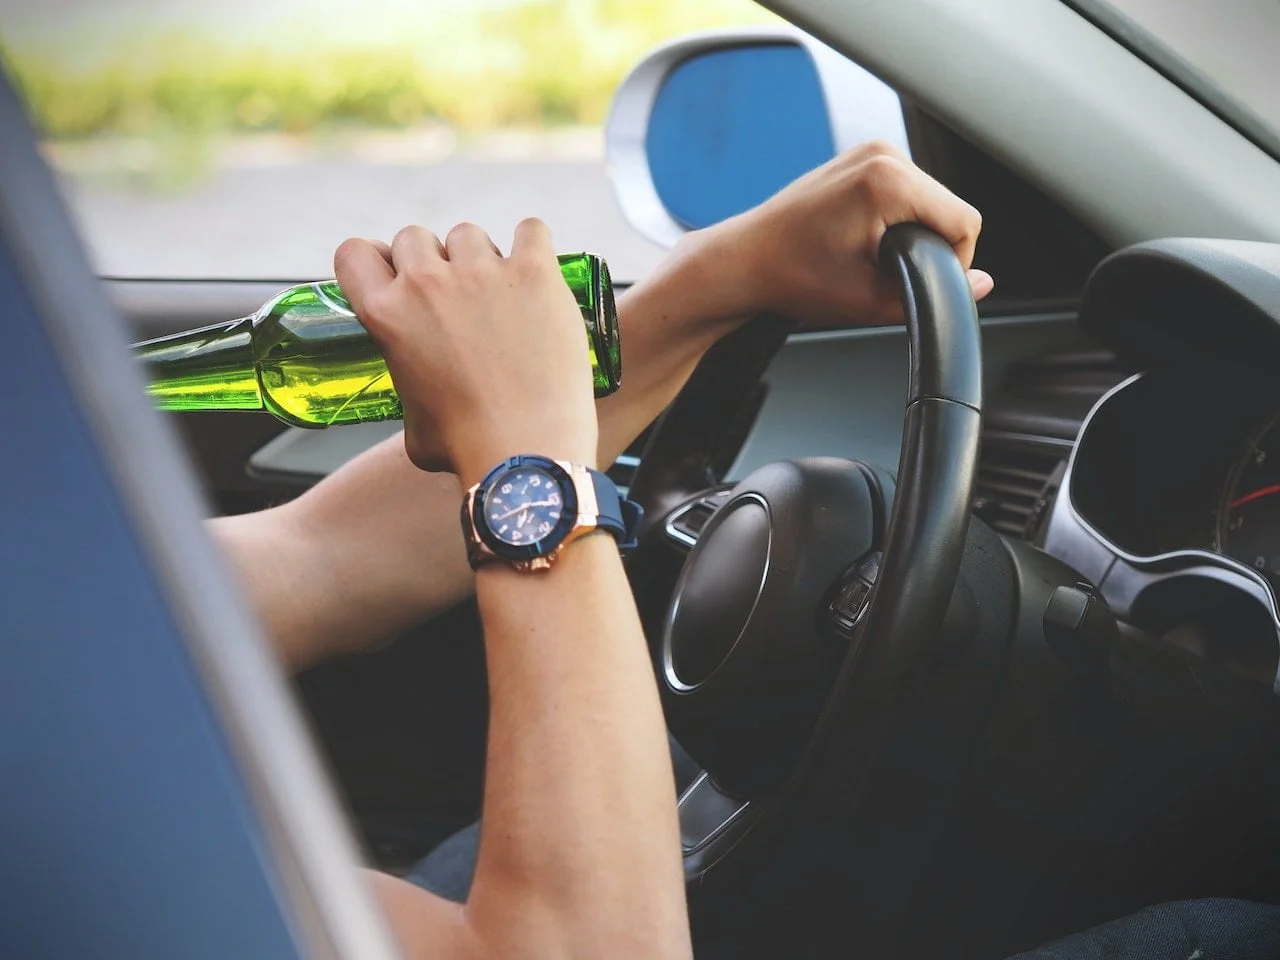 Steering Clear of Hazards: The Dangers of Drinking and Driving